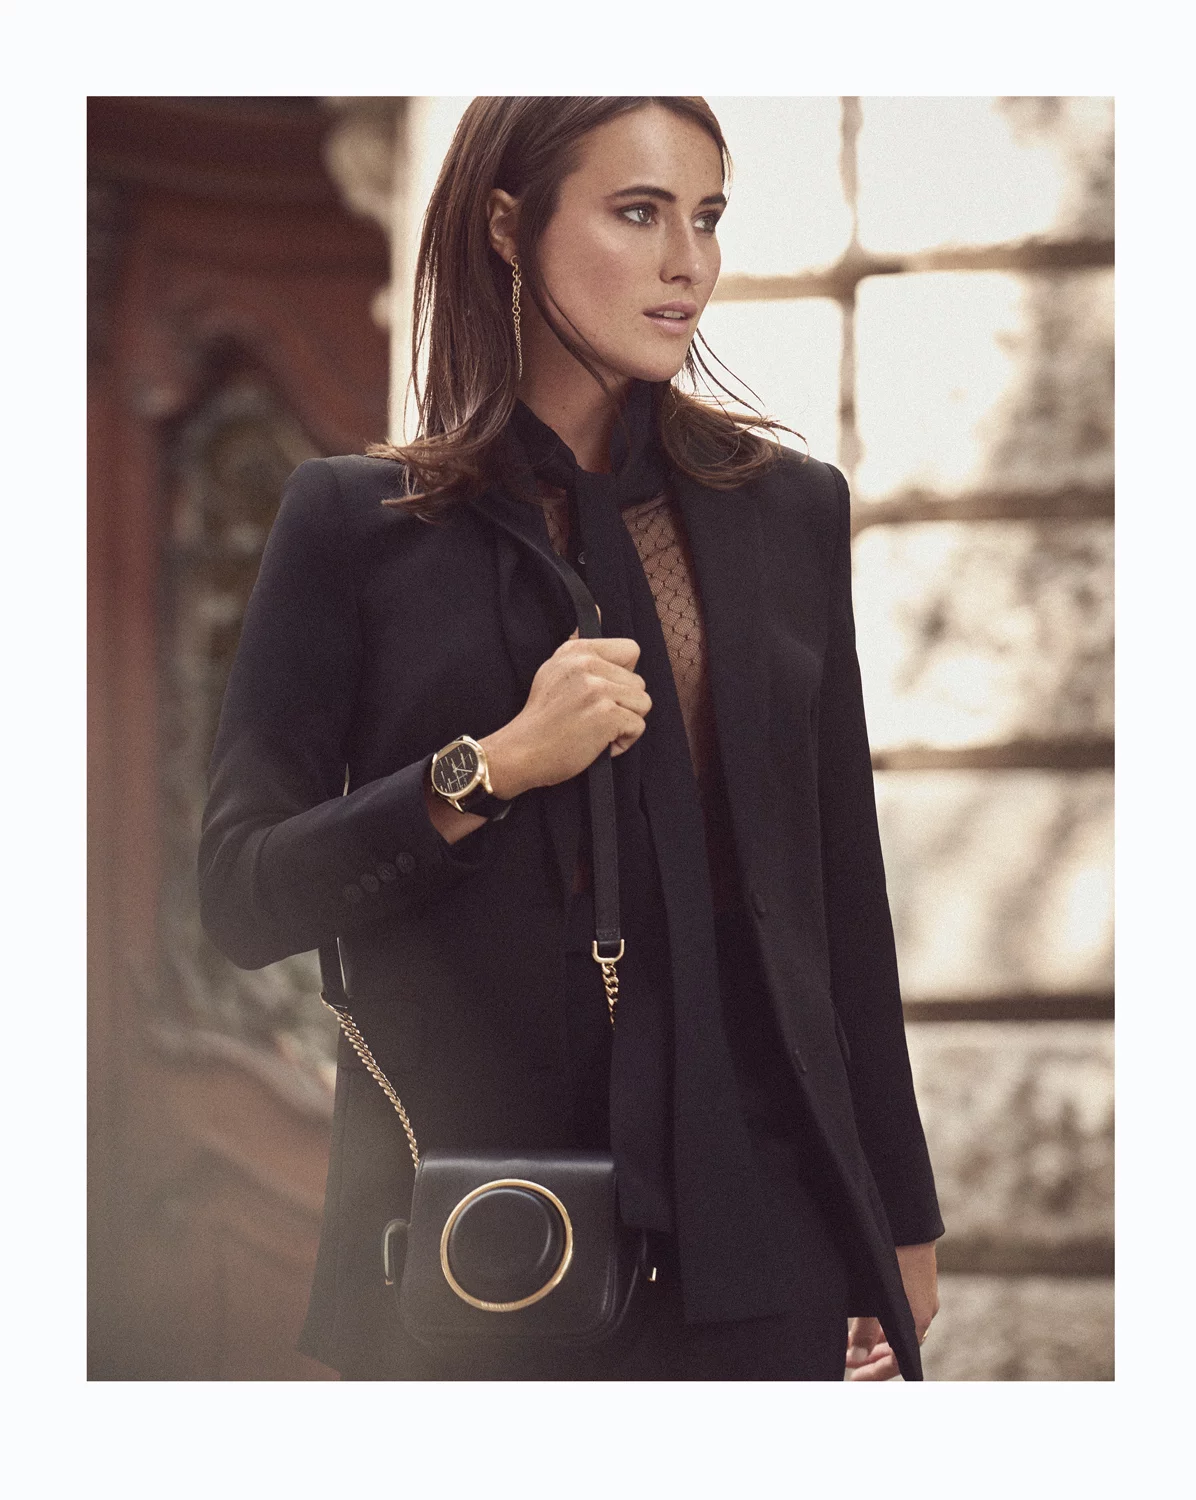 Vogue Promo Michael Kors Access 2 by Andreas ORTNER